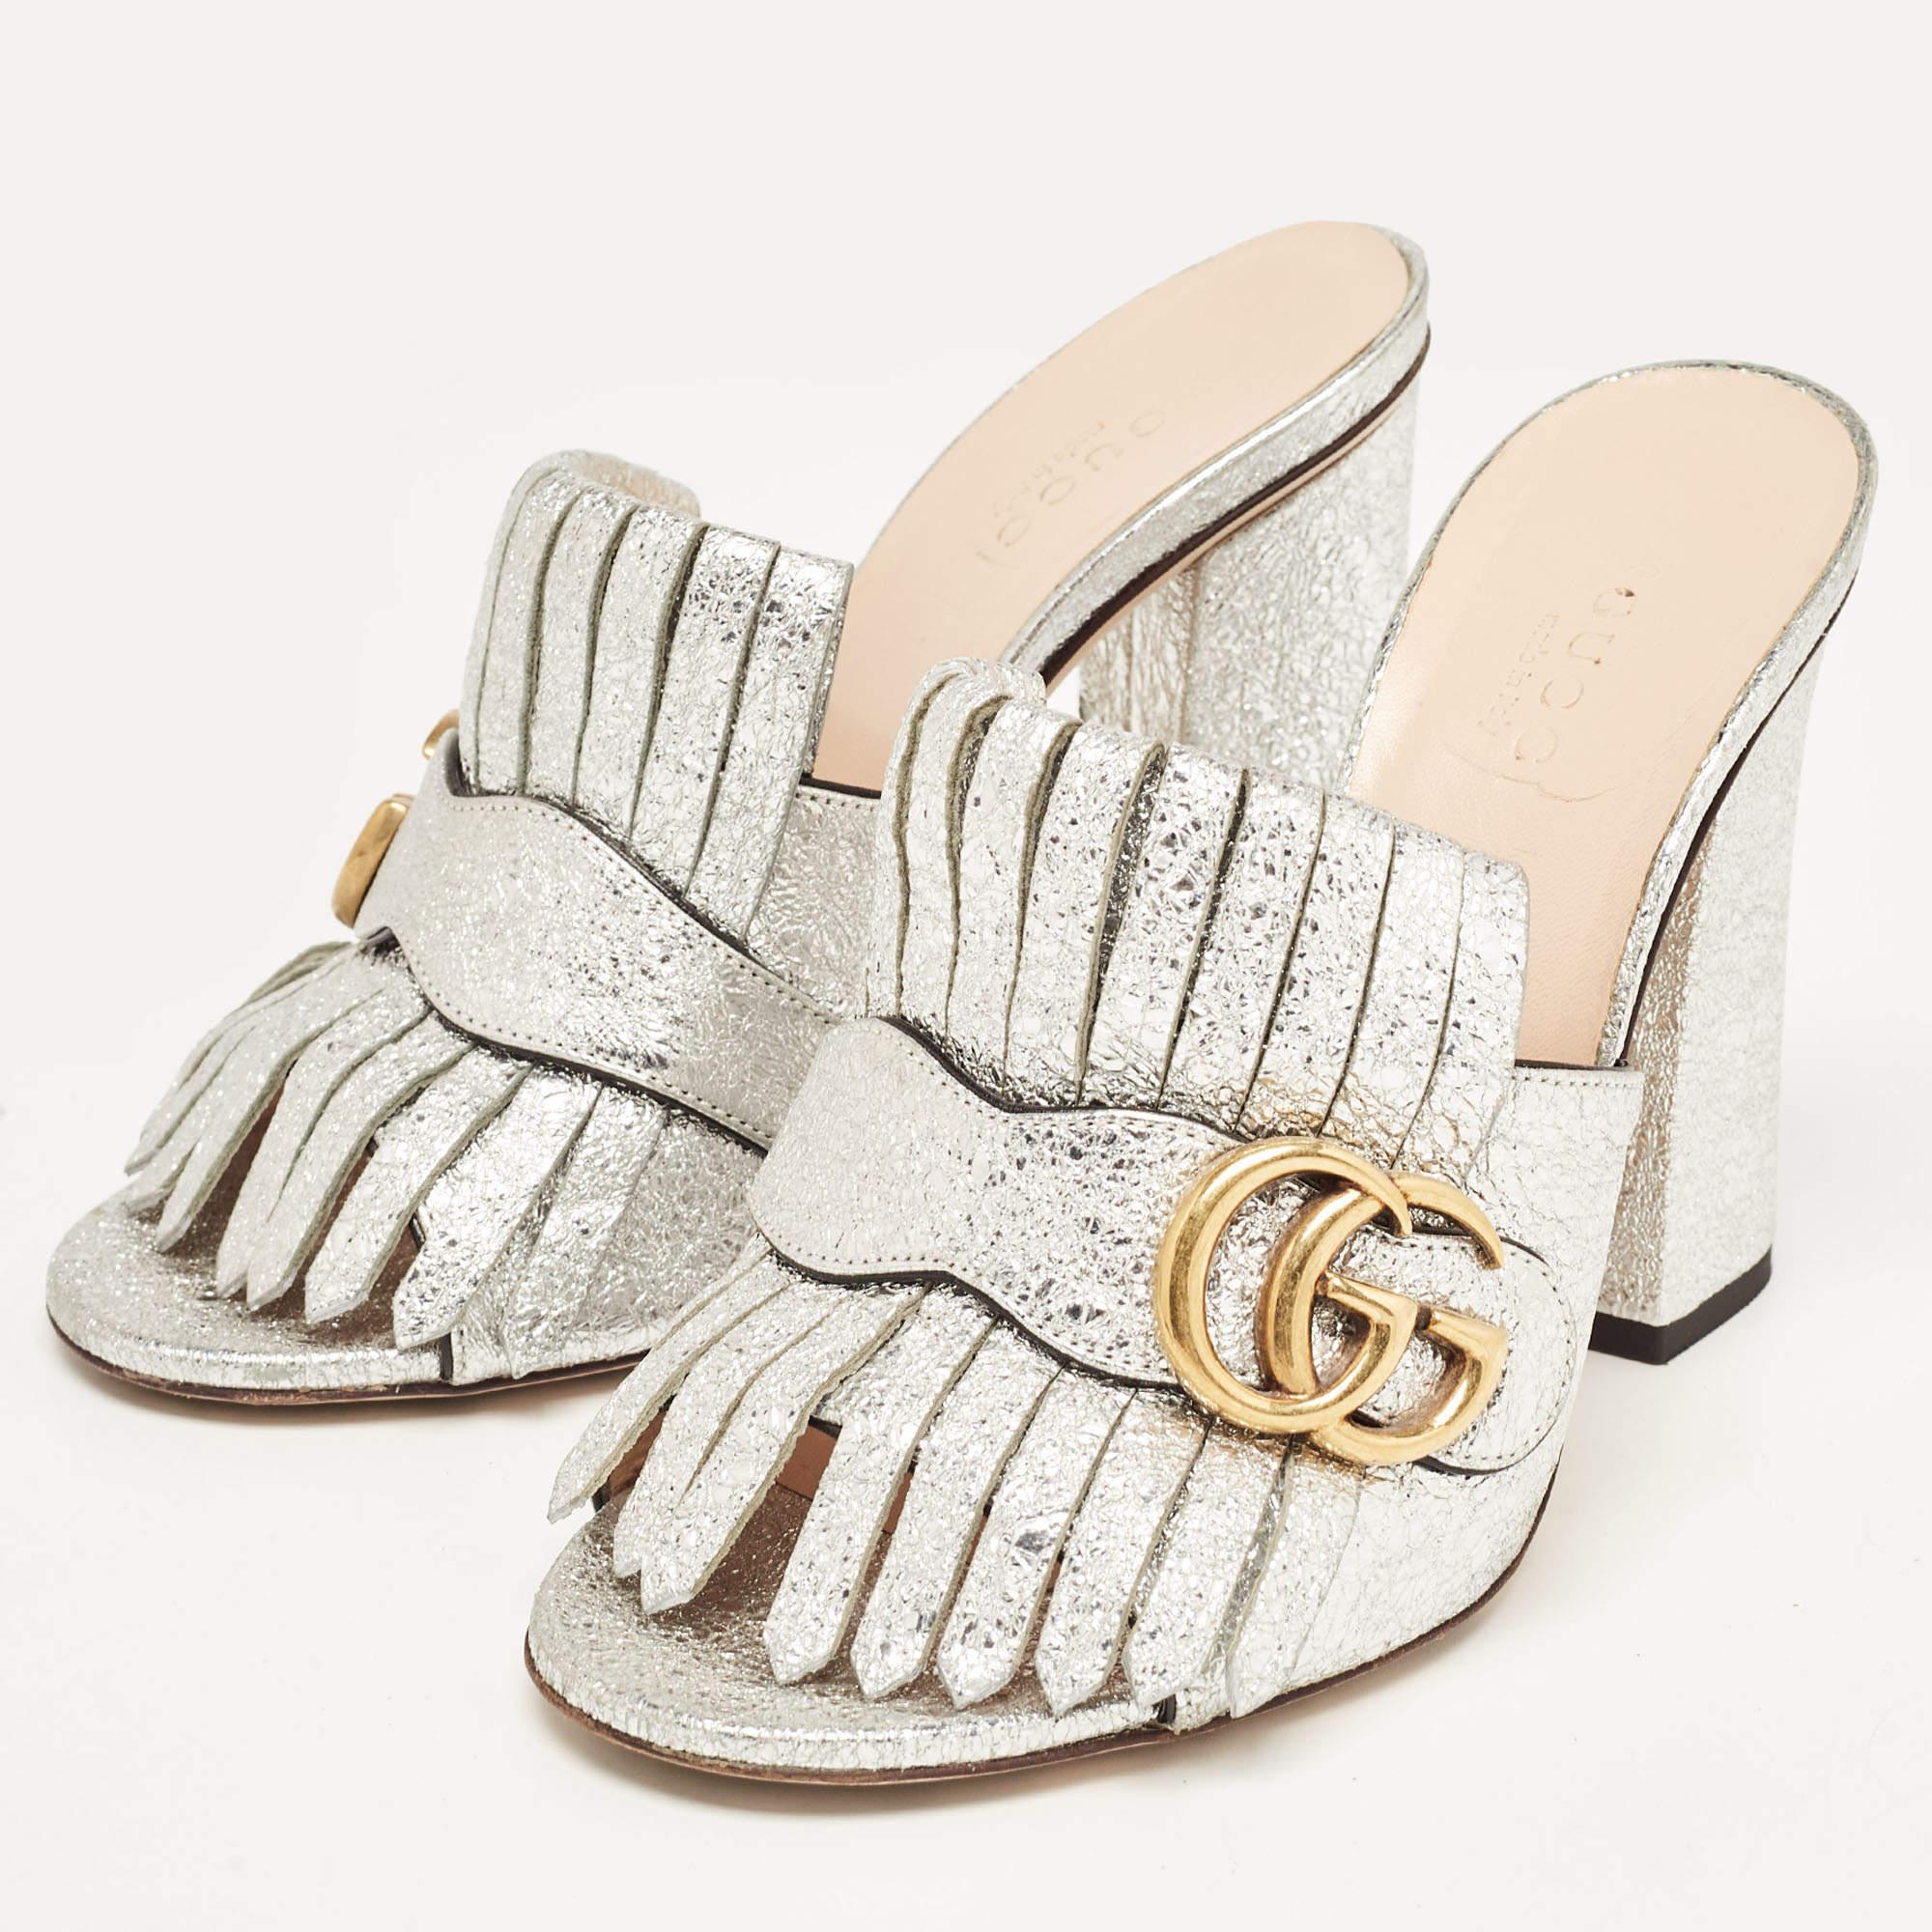 Gucci Silver Crackle Leather GG Marmont Fringed Slide Sandals Size 36 3